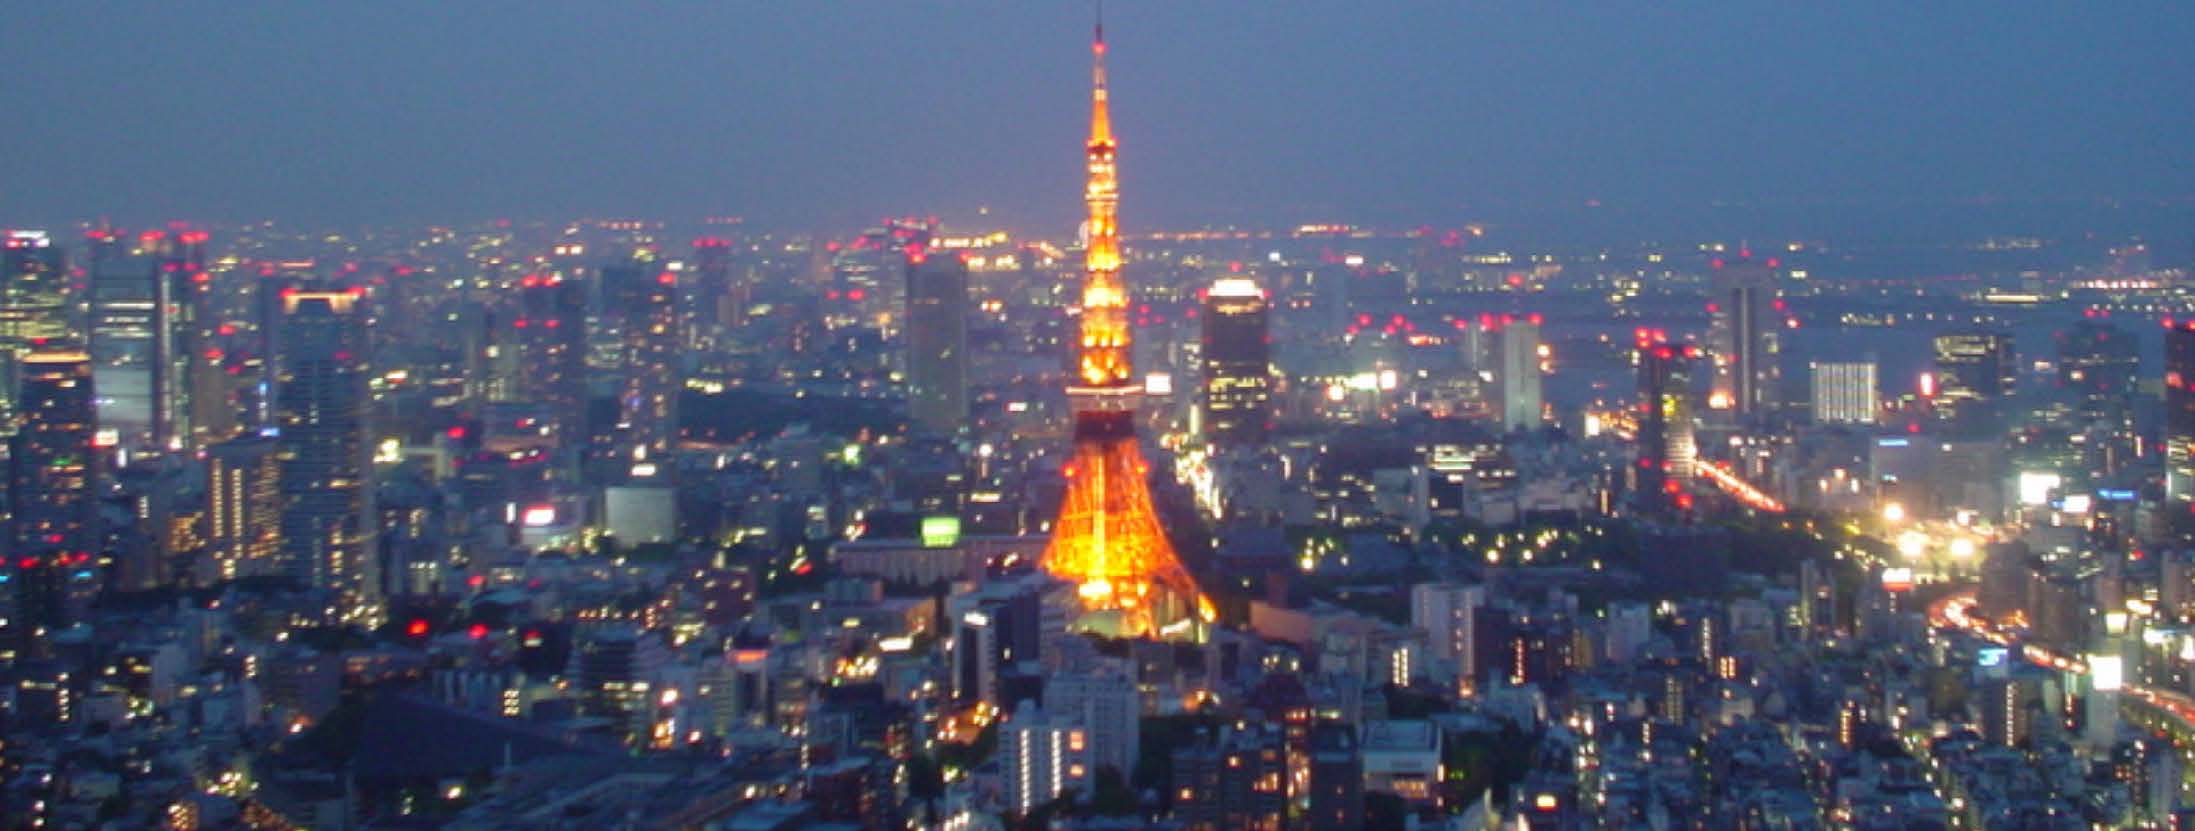  Tokyo at night, featuring the Tokyo Tower.